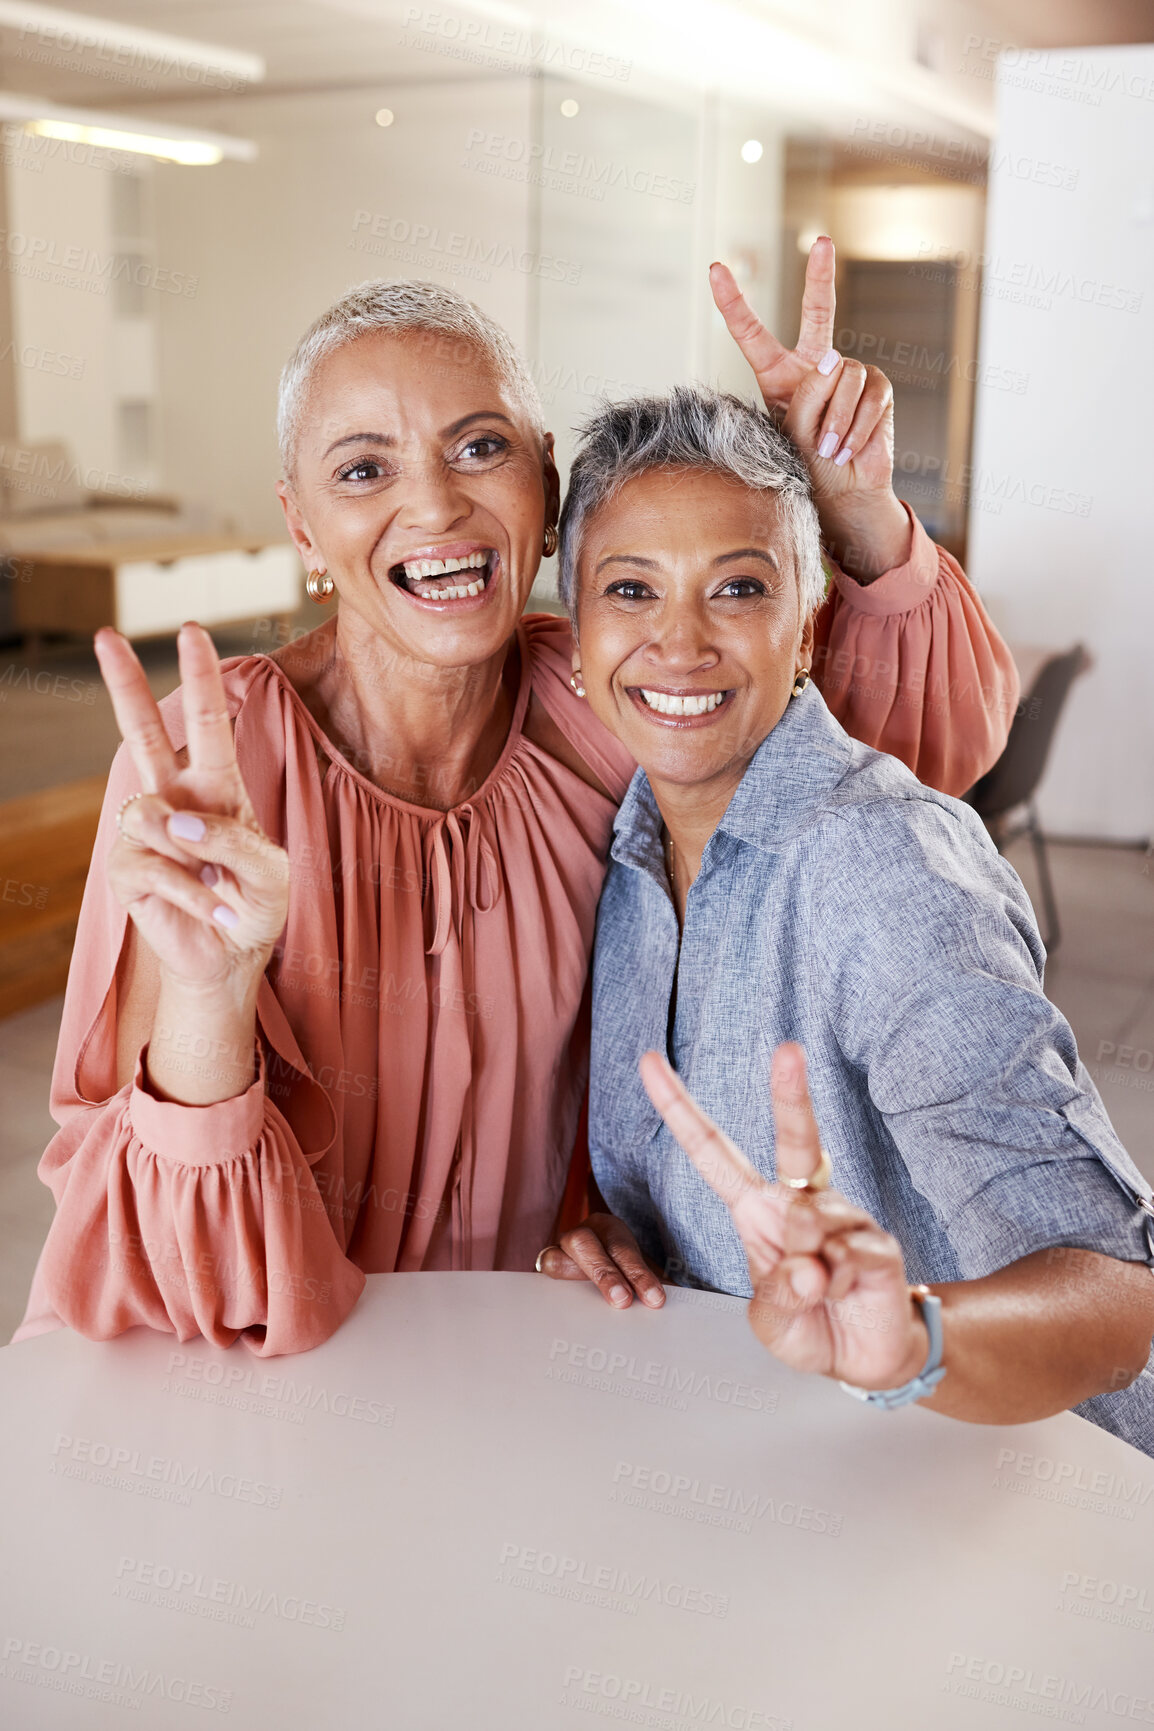 Buy stock photo Senior women, bonding or peace sign in house or home living room for social media, profile picture or cool memory capture. Portrait, happy smile or retirement elderly friends and emoji hands gesture